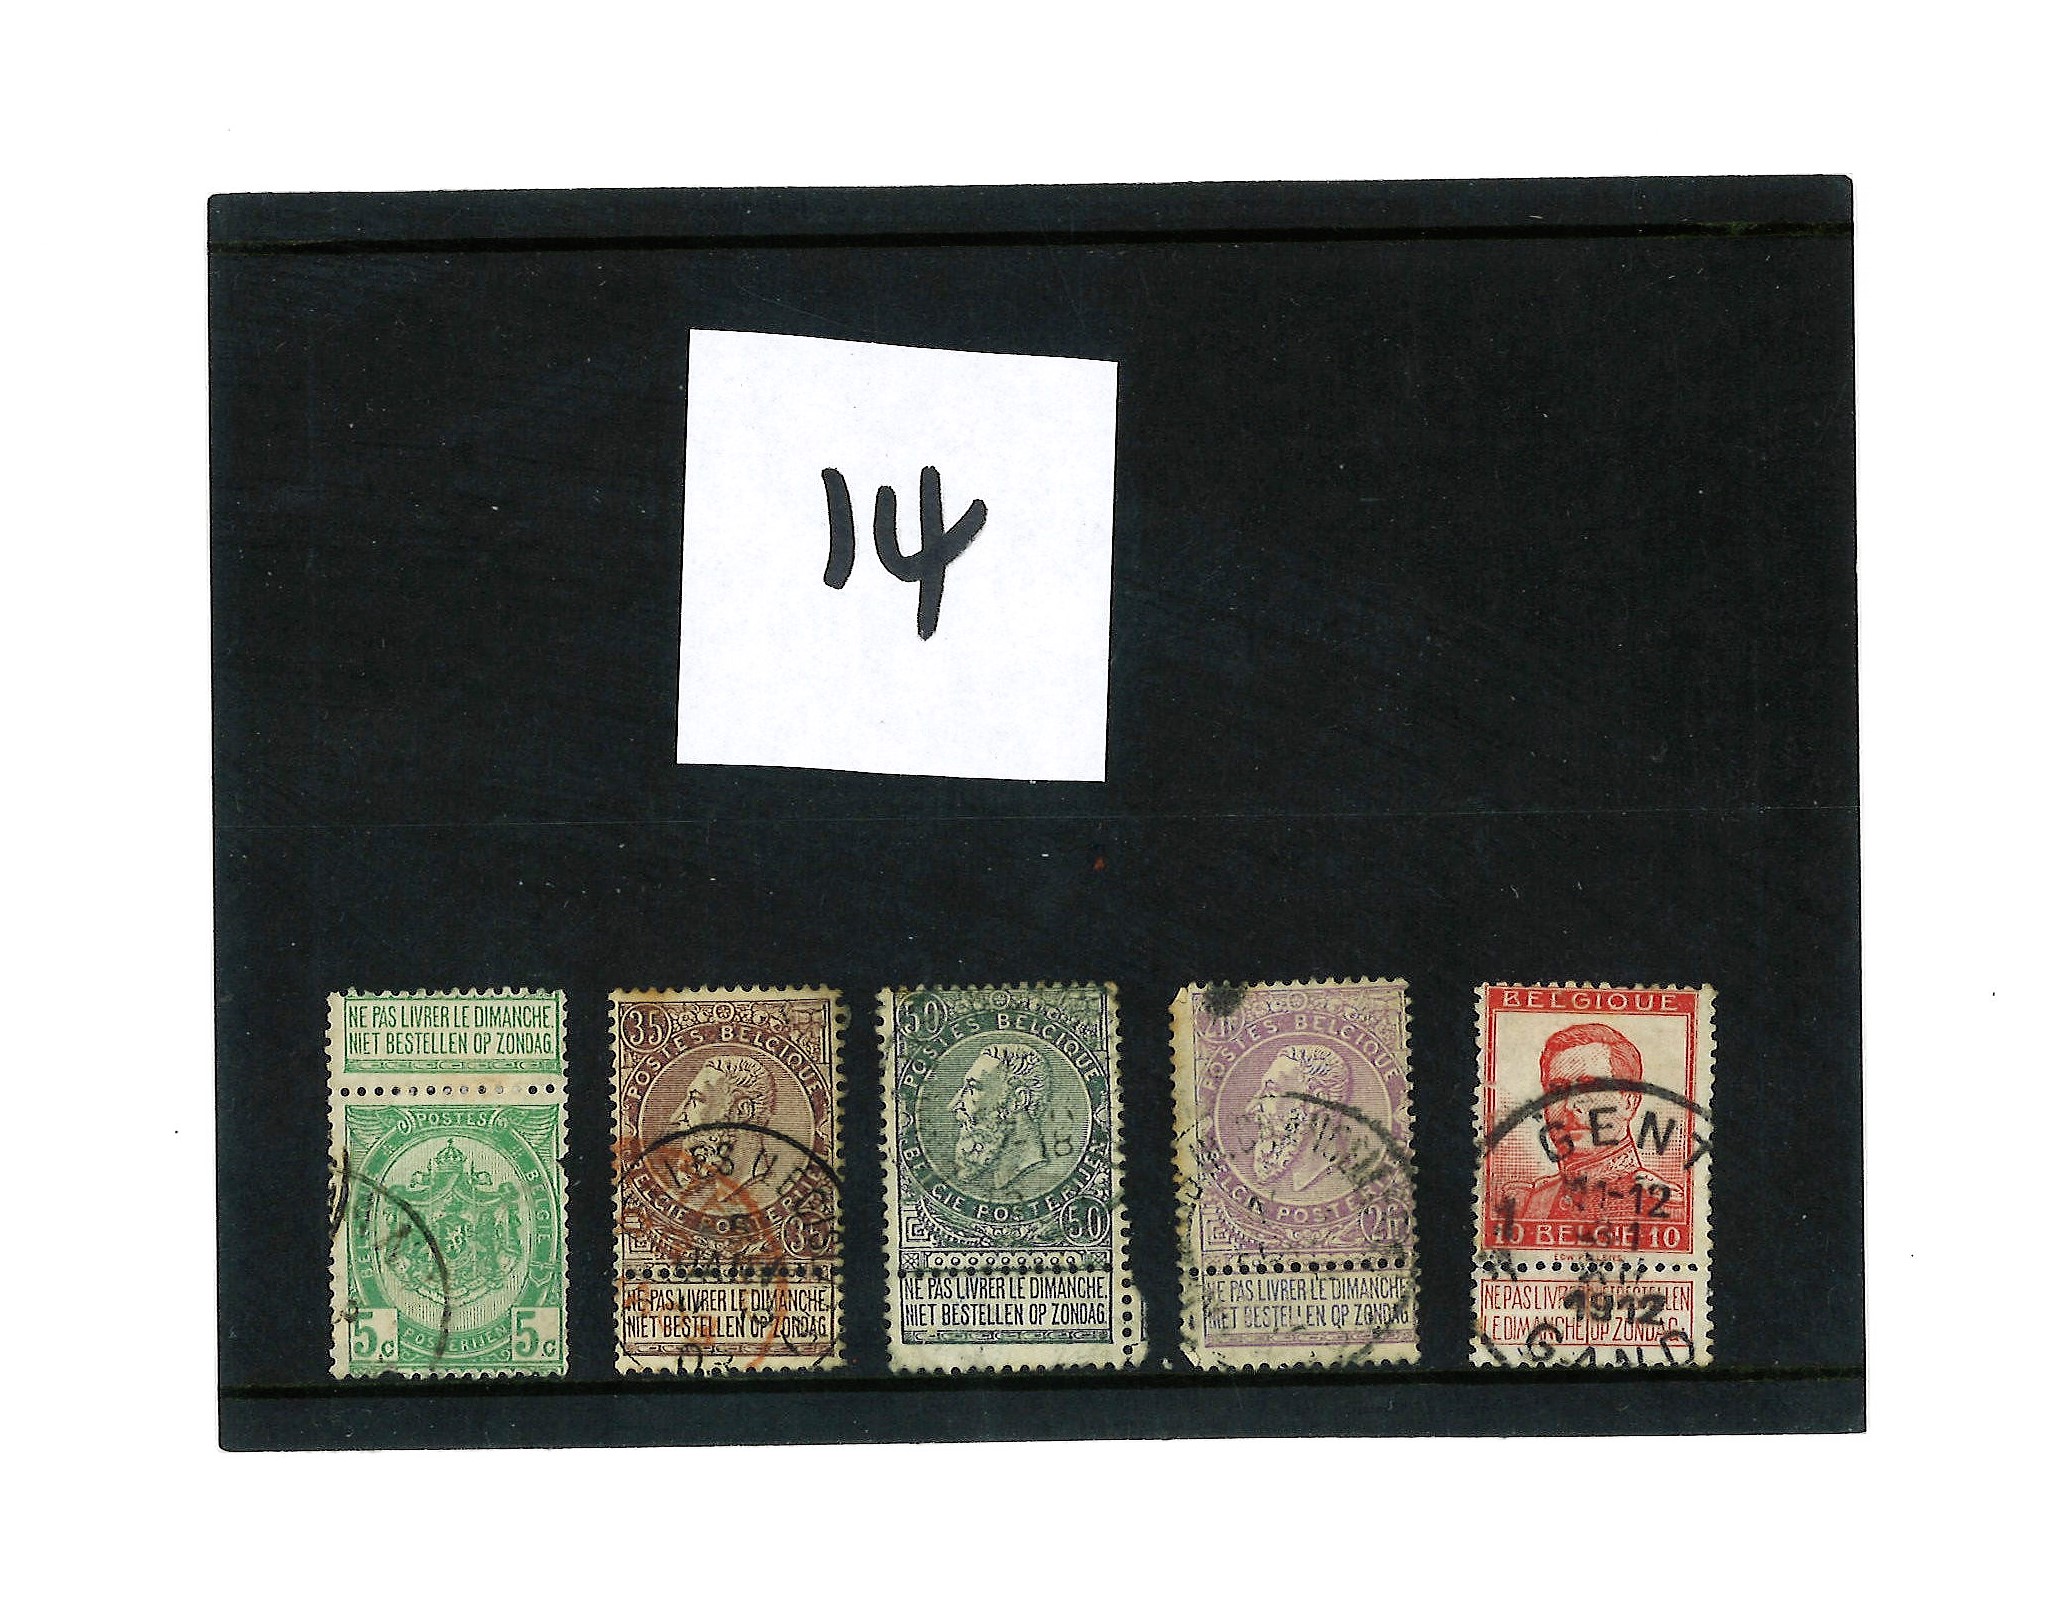 Belgium used stamp collection. 5 stamps. SG81 5c green, SG86a 35c brown, SG88 50c grey, SG91 2f